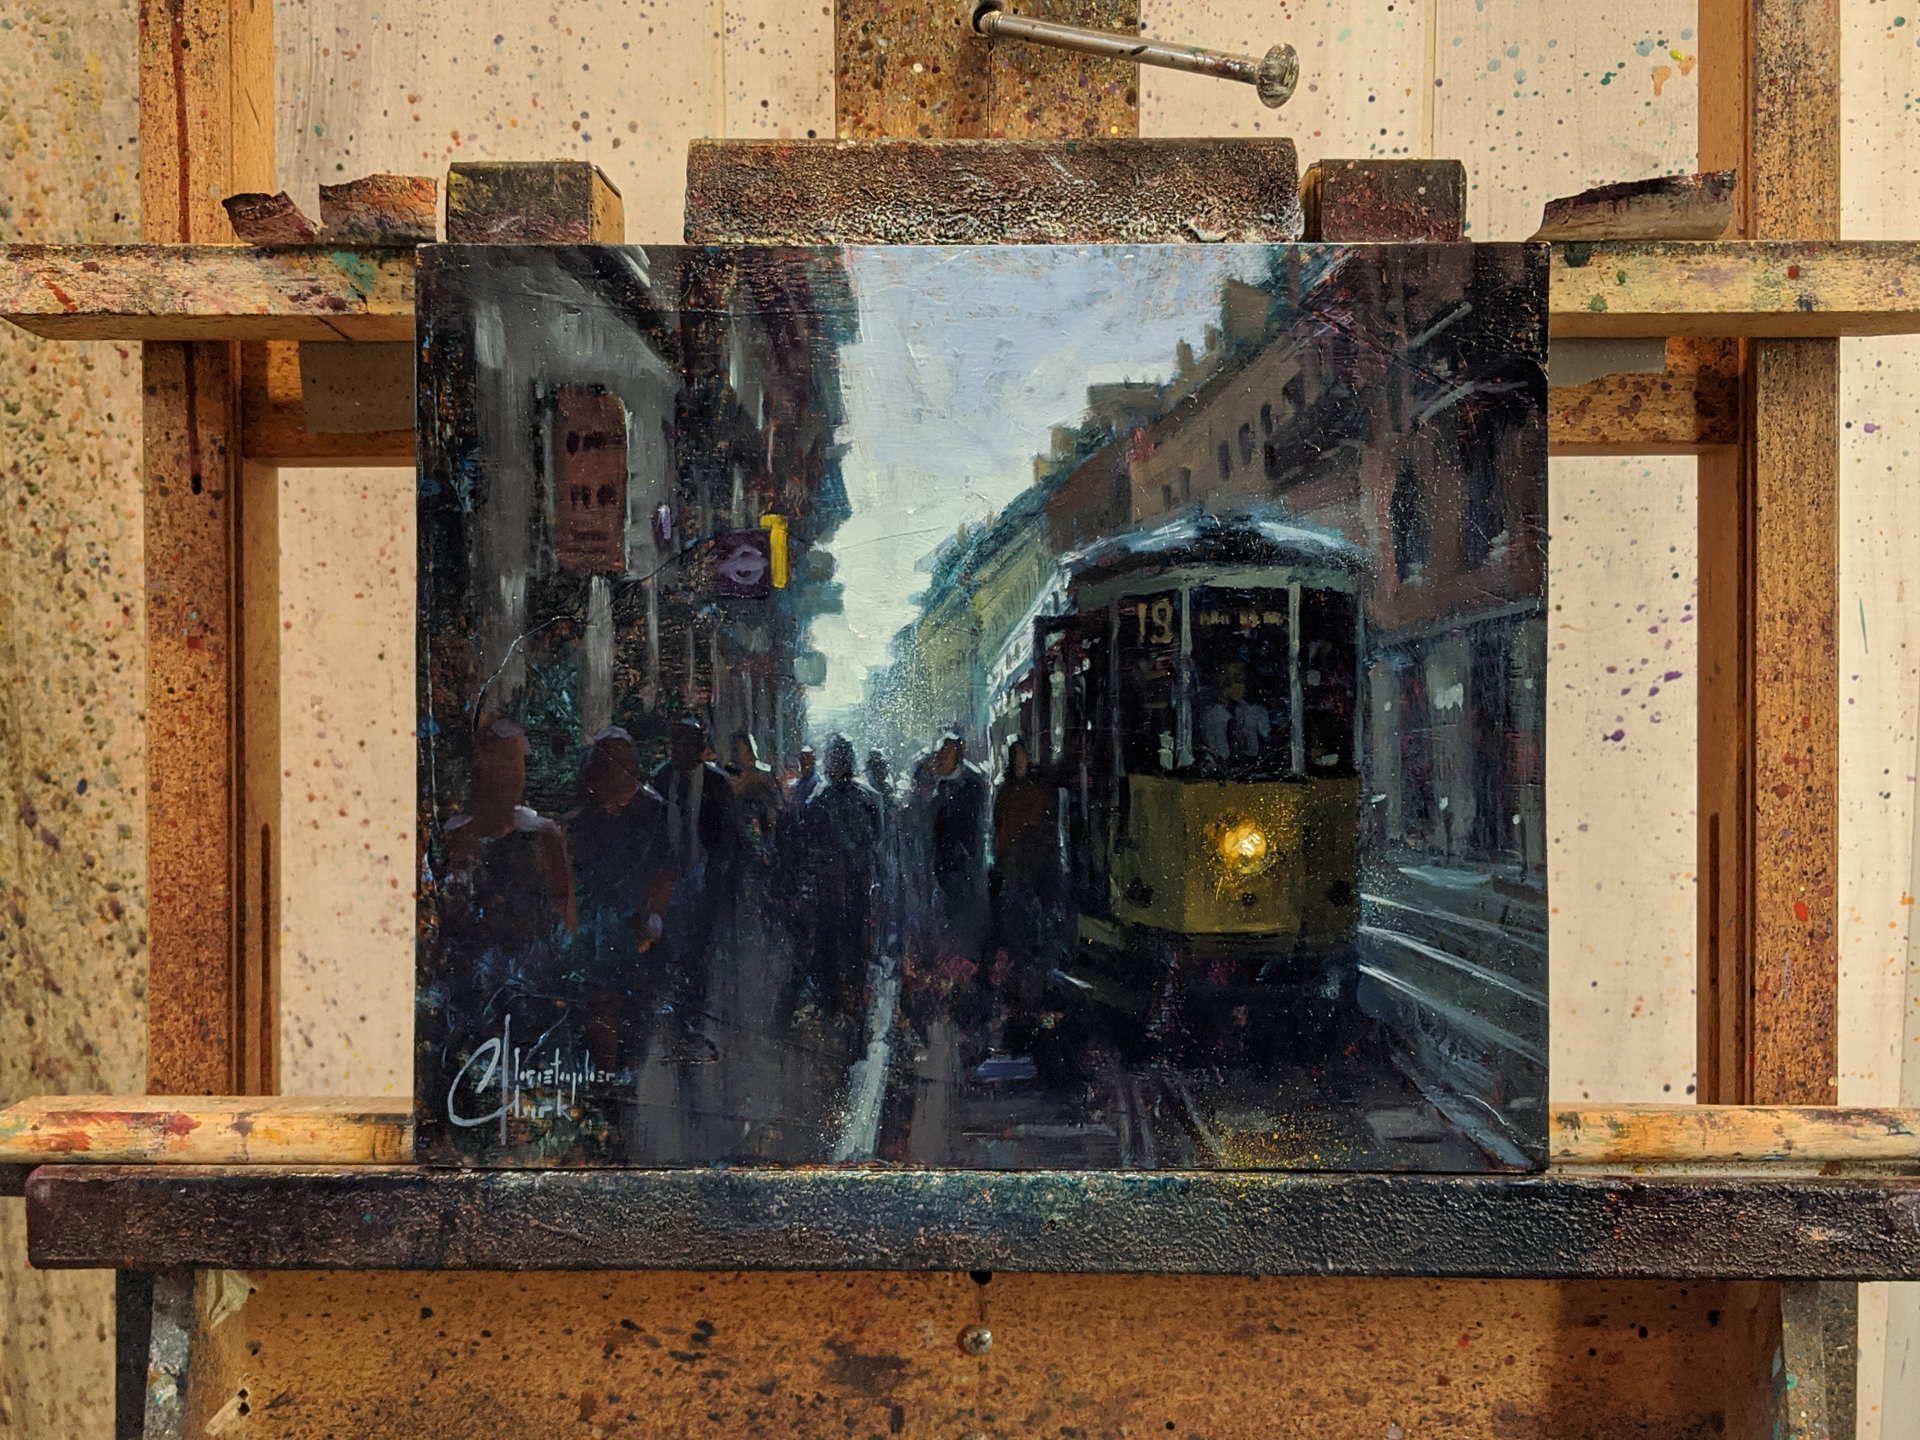 Milan, Italy - Early Morning Trolley by Christopher Clark